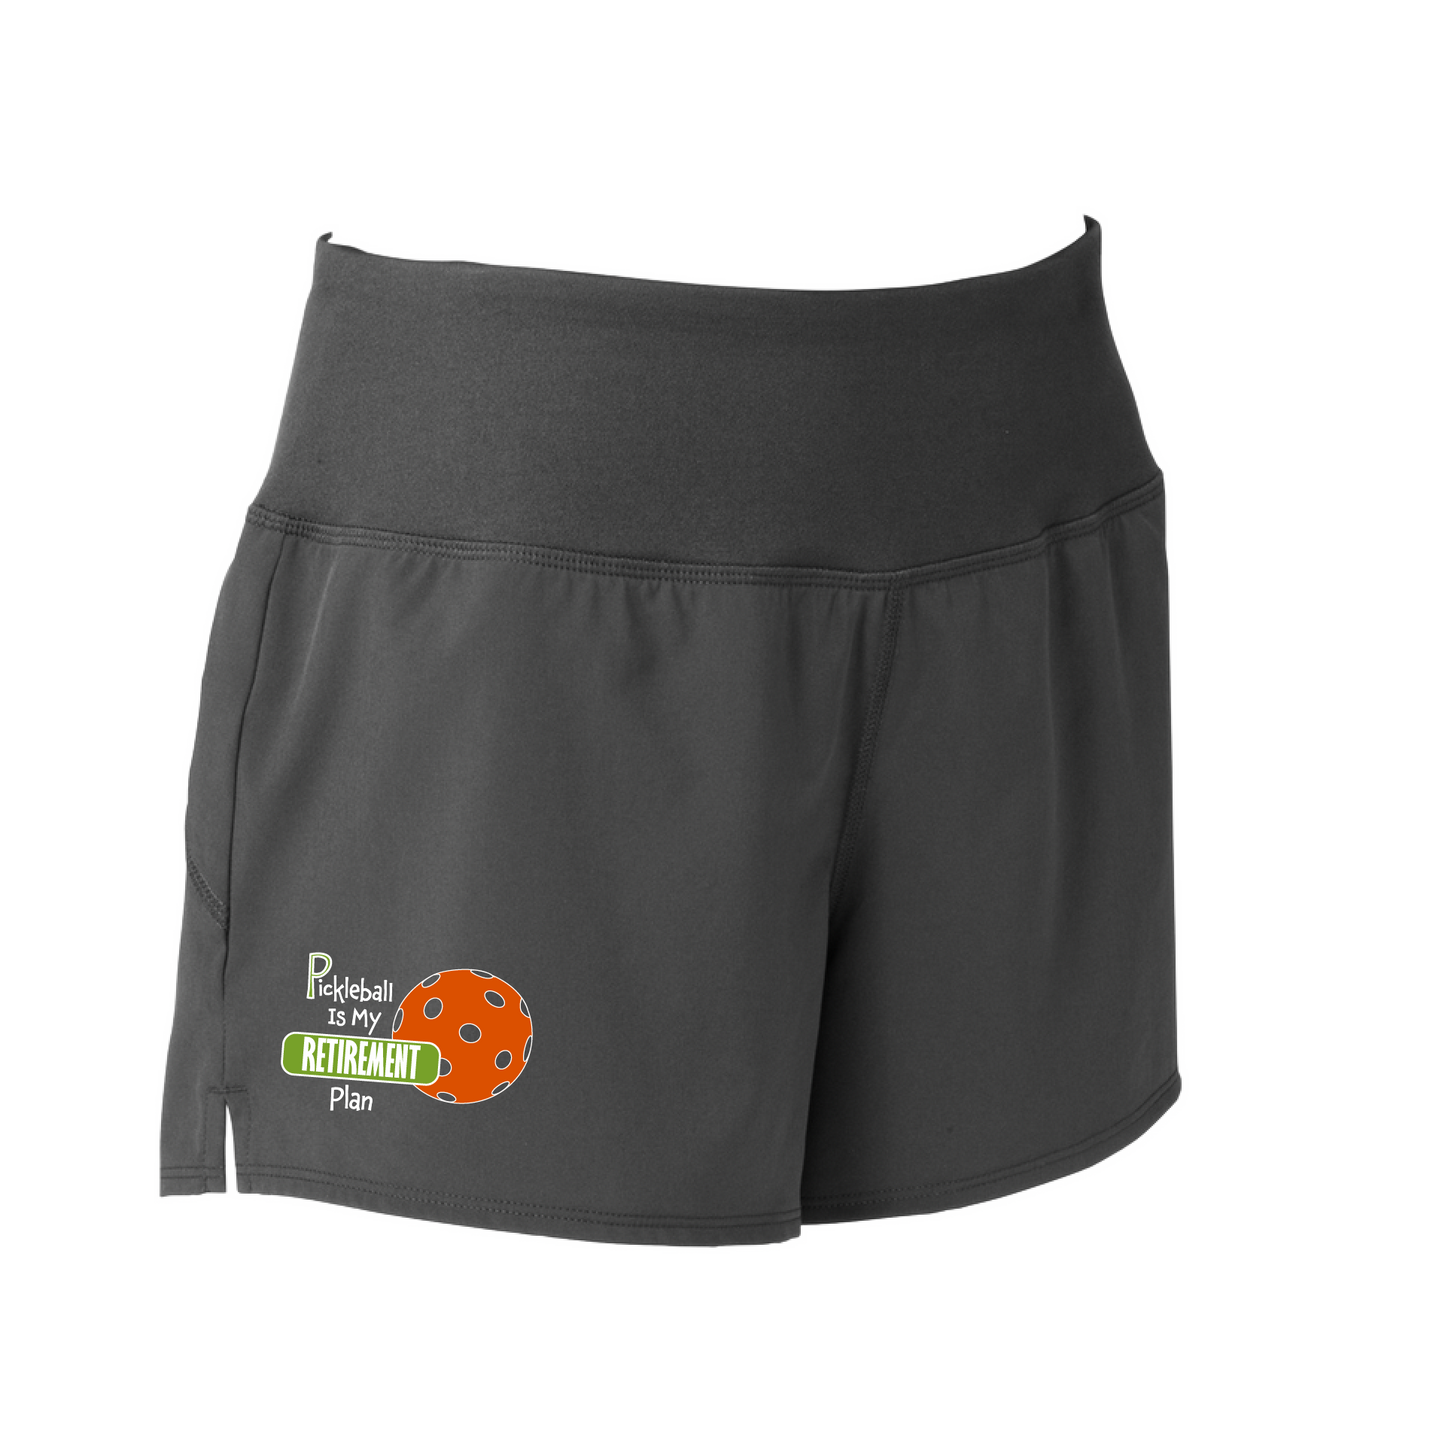 Pickleball Shorts Design: Pickleball is my Retirement Plan  Sport Tek women’s repeat shorts come with built-in cell phone pocket on the exterior of the waistband. You can also feel secure knowing that no matter how strenuous the exercise, the shorts will remain in place (it won’t ride up!). These shorts are extremely versatile and trendy. Transition from the Pickleball court to running errands smoothly.